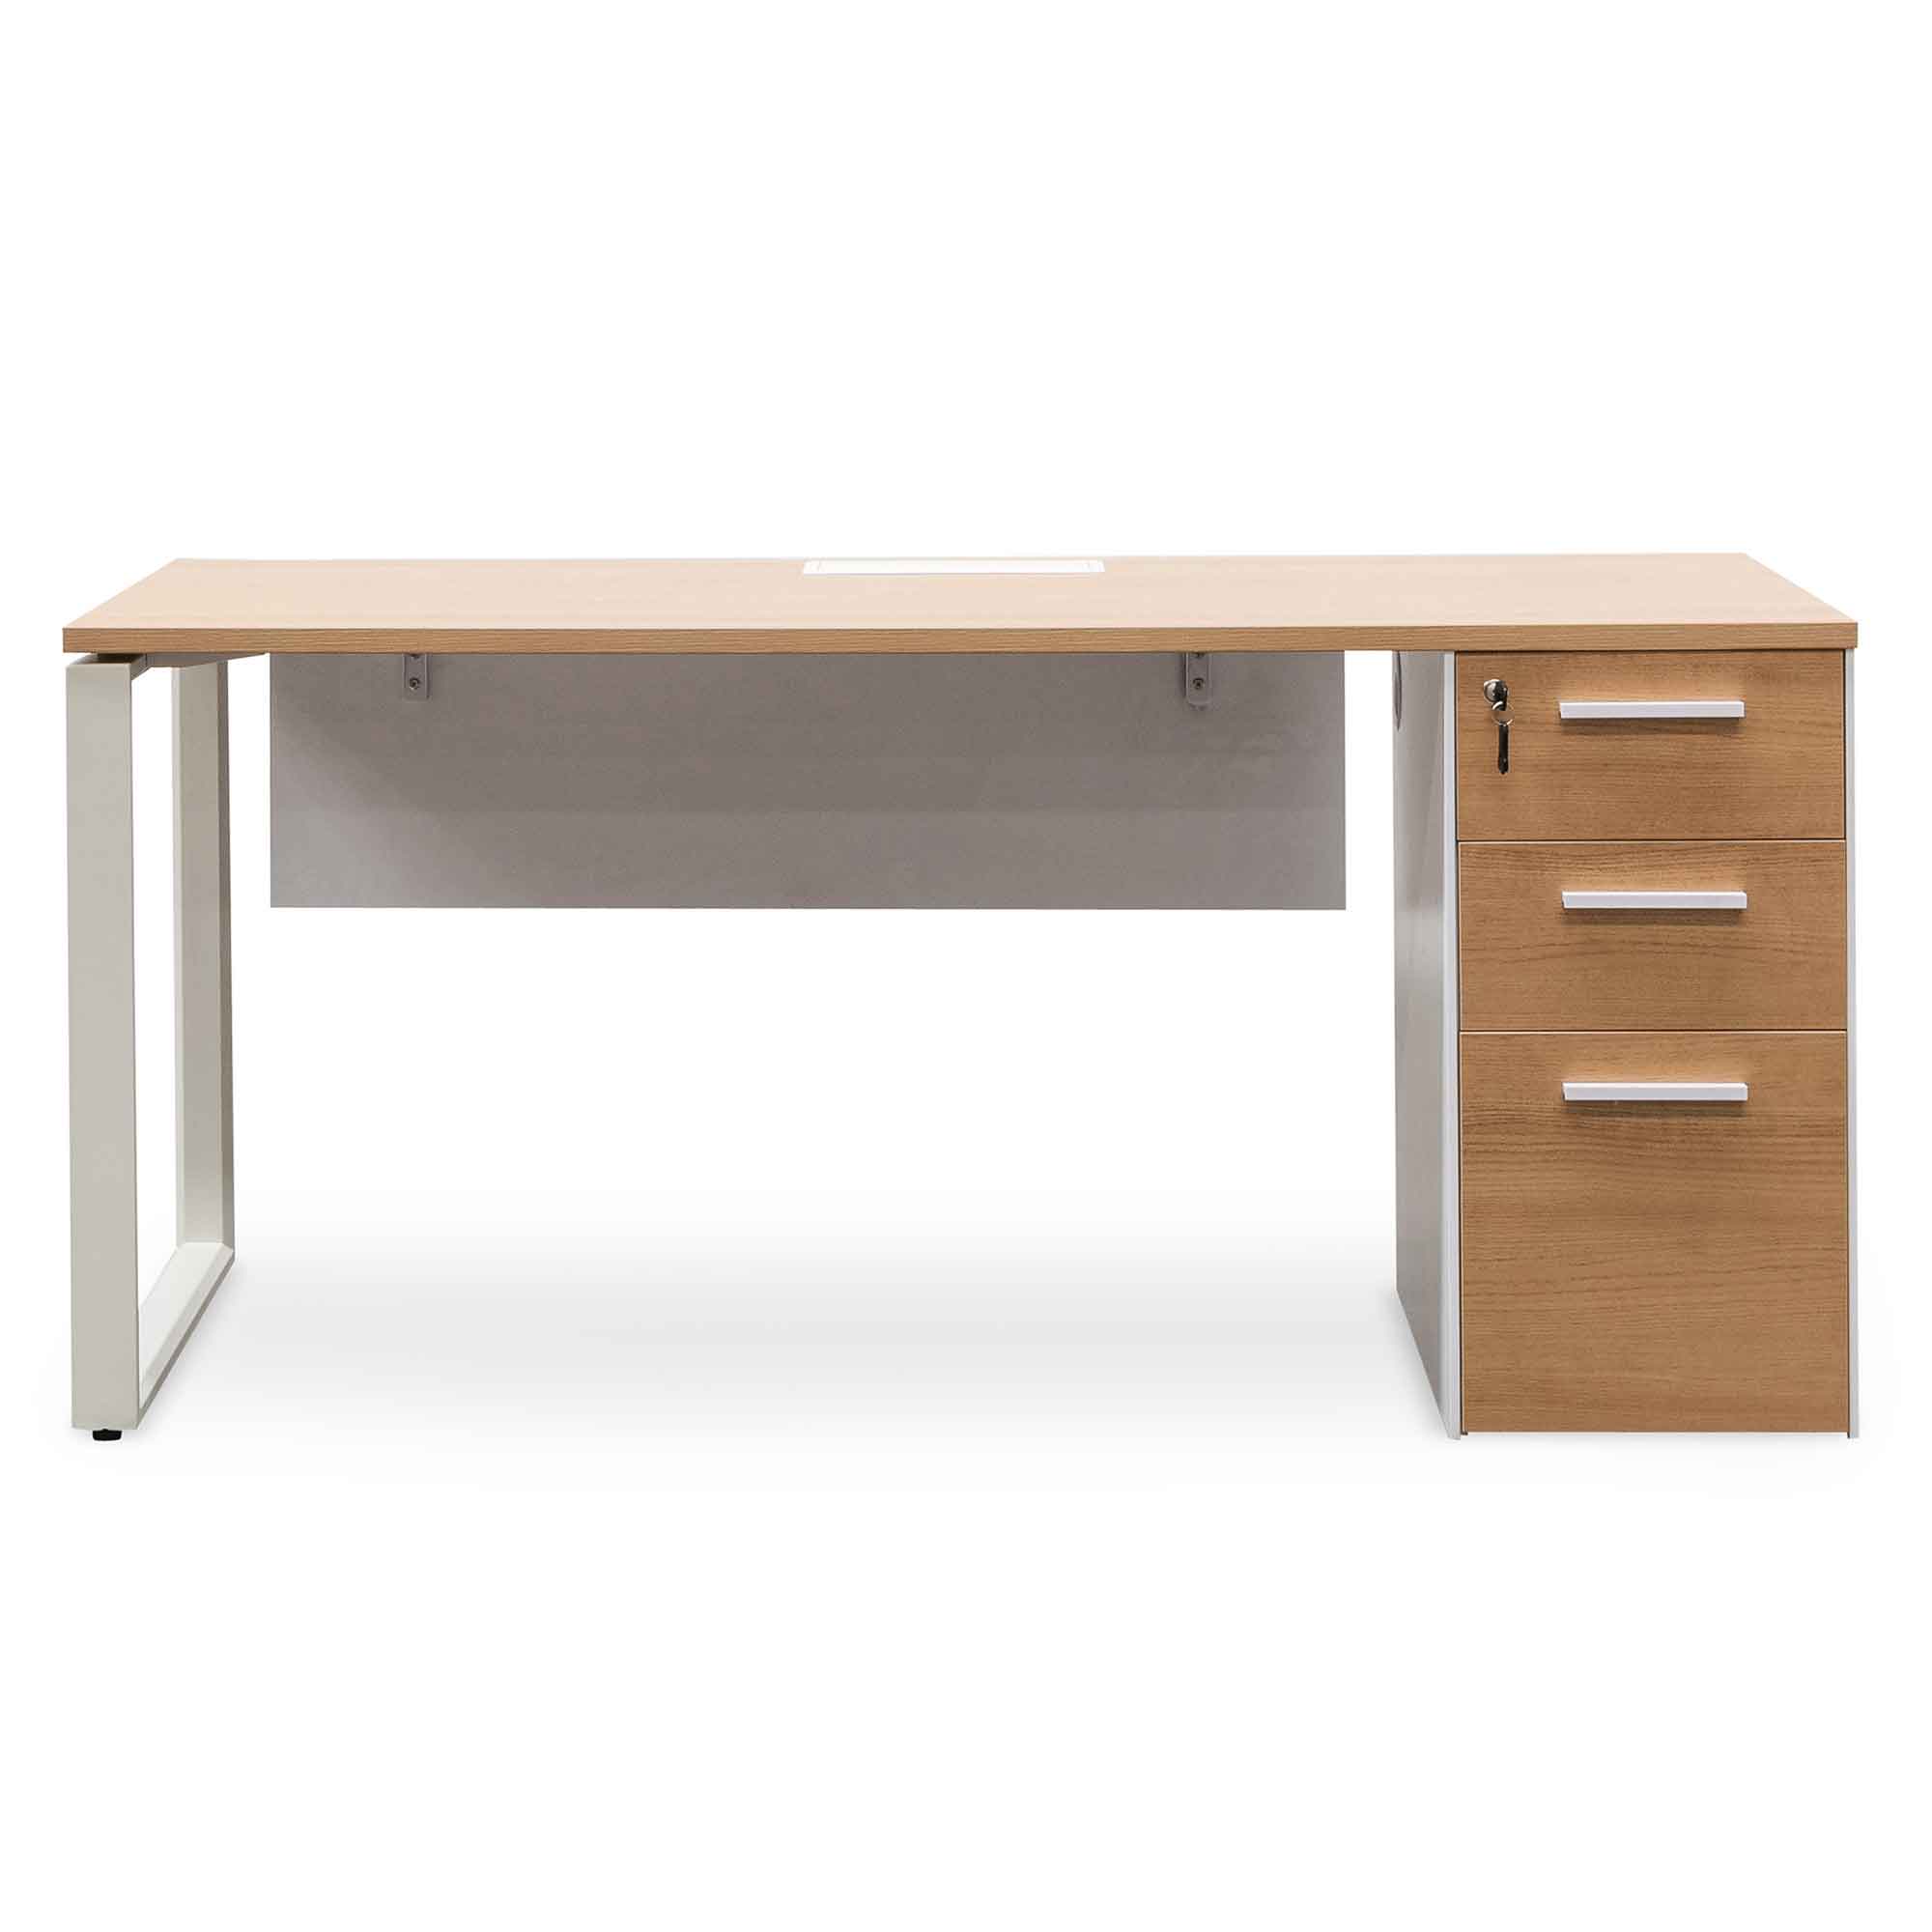 Sofia 1 Seater Office Desk - Natural and White